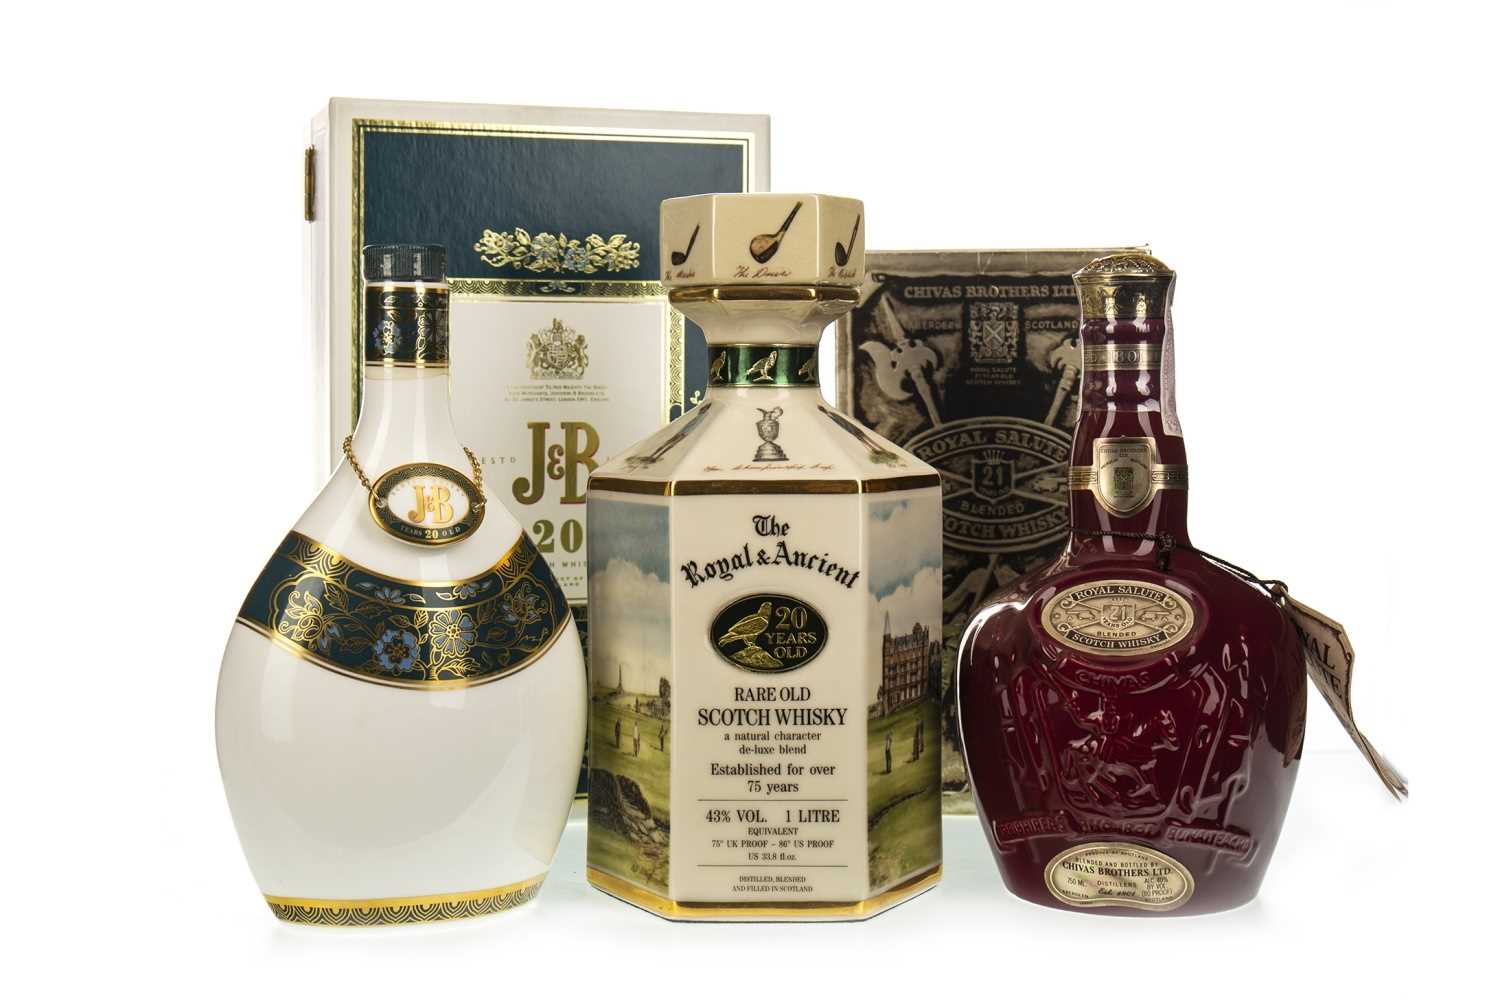 Lot 1058 - CHIVAS REGAL ROYAL SALUTE RUBY DECANTER, ROYAL & ANCIENT 20 YEARS OLD, AND J&B 20 YEARS OLD